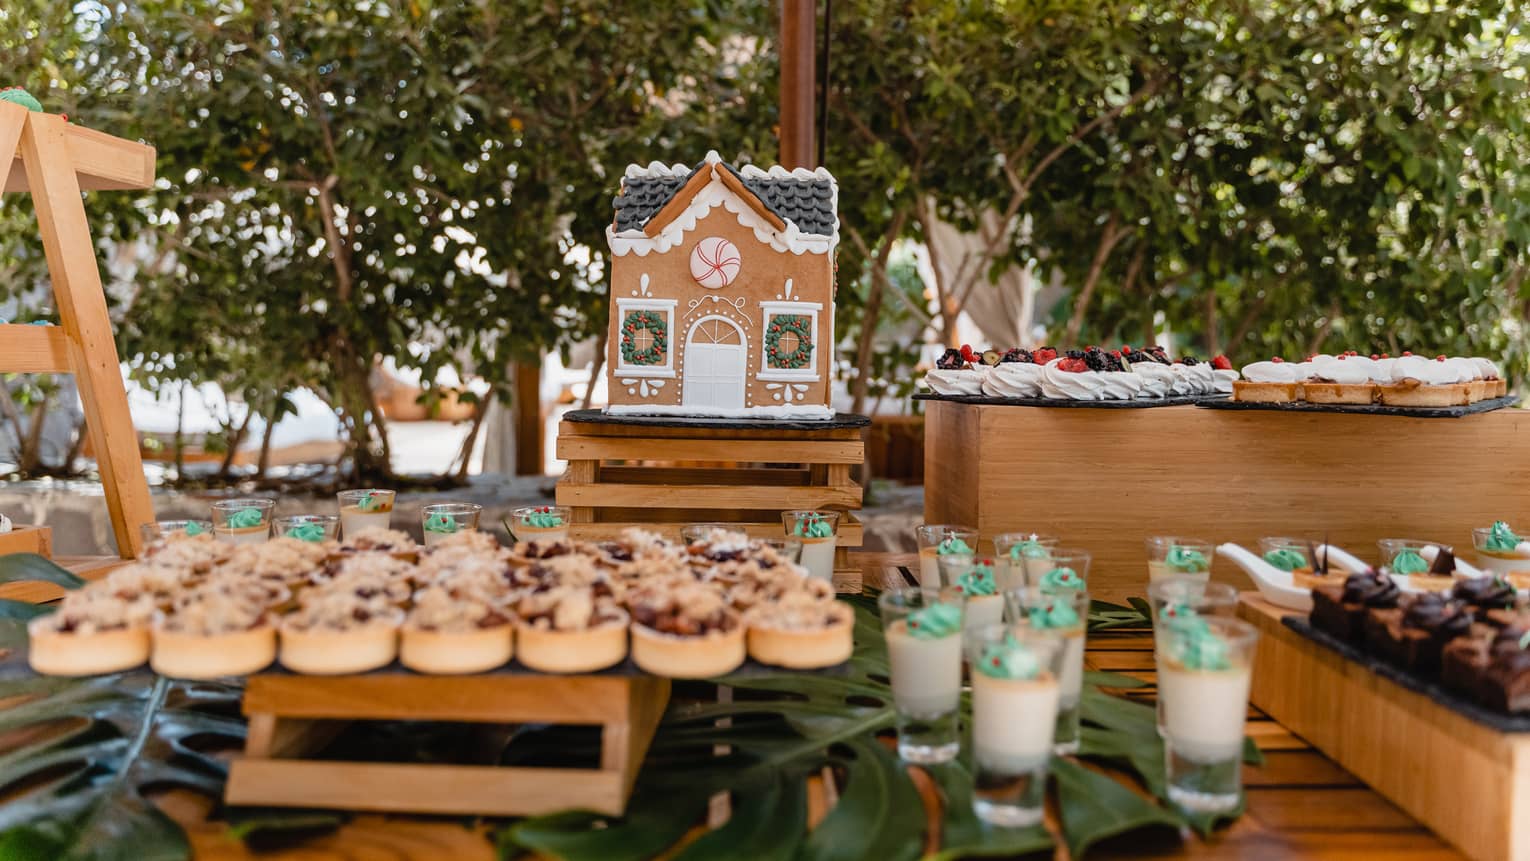 Wooden table set with holiday-themed desserts including cookies, tarts, merengues, custard-in-a-glass and a gingerbread house, all placed on pallet-style stands of varying heights